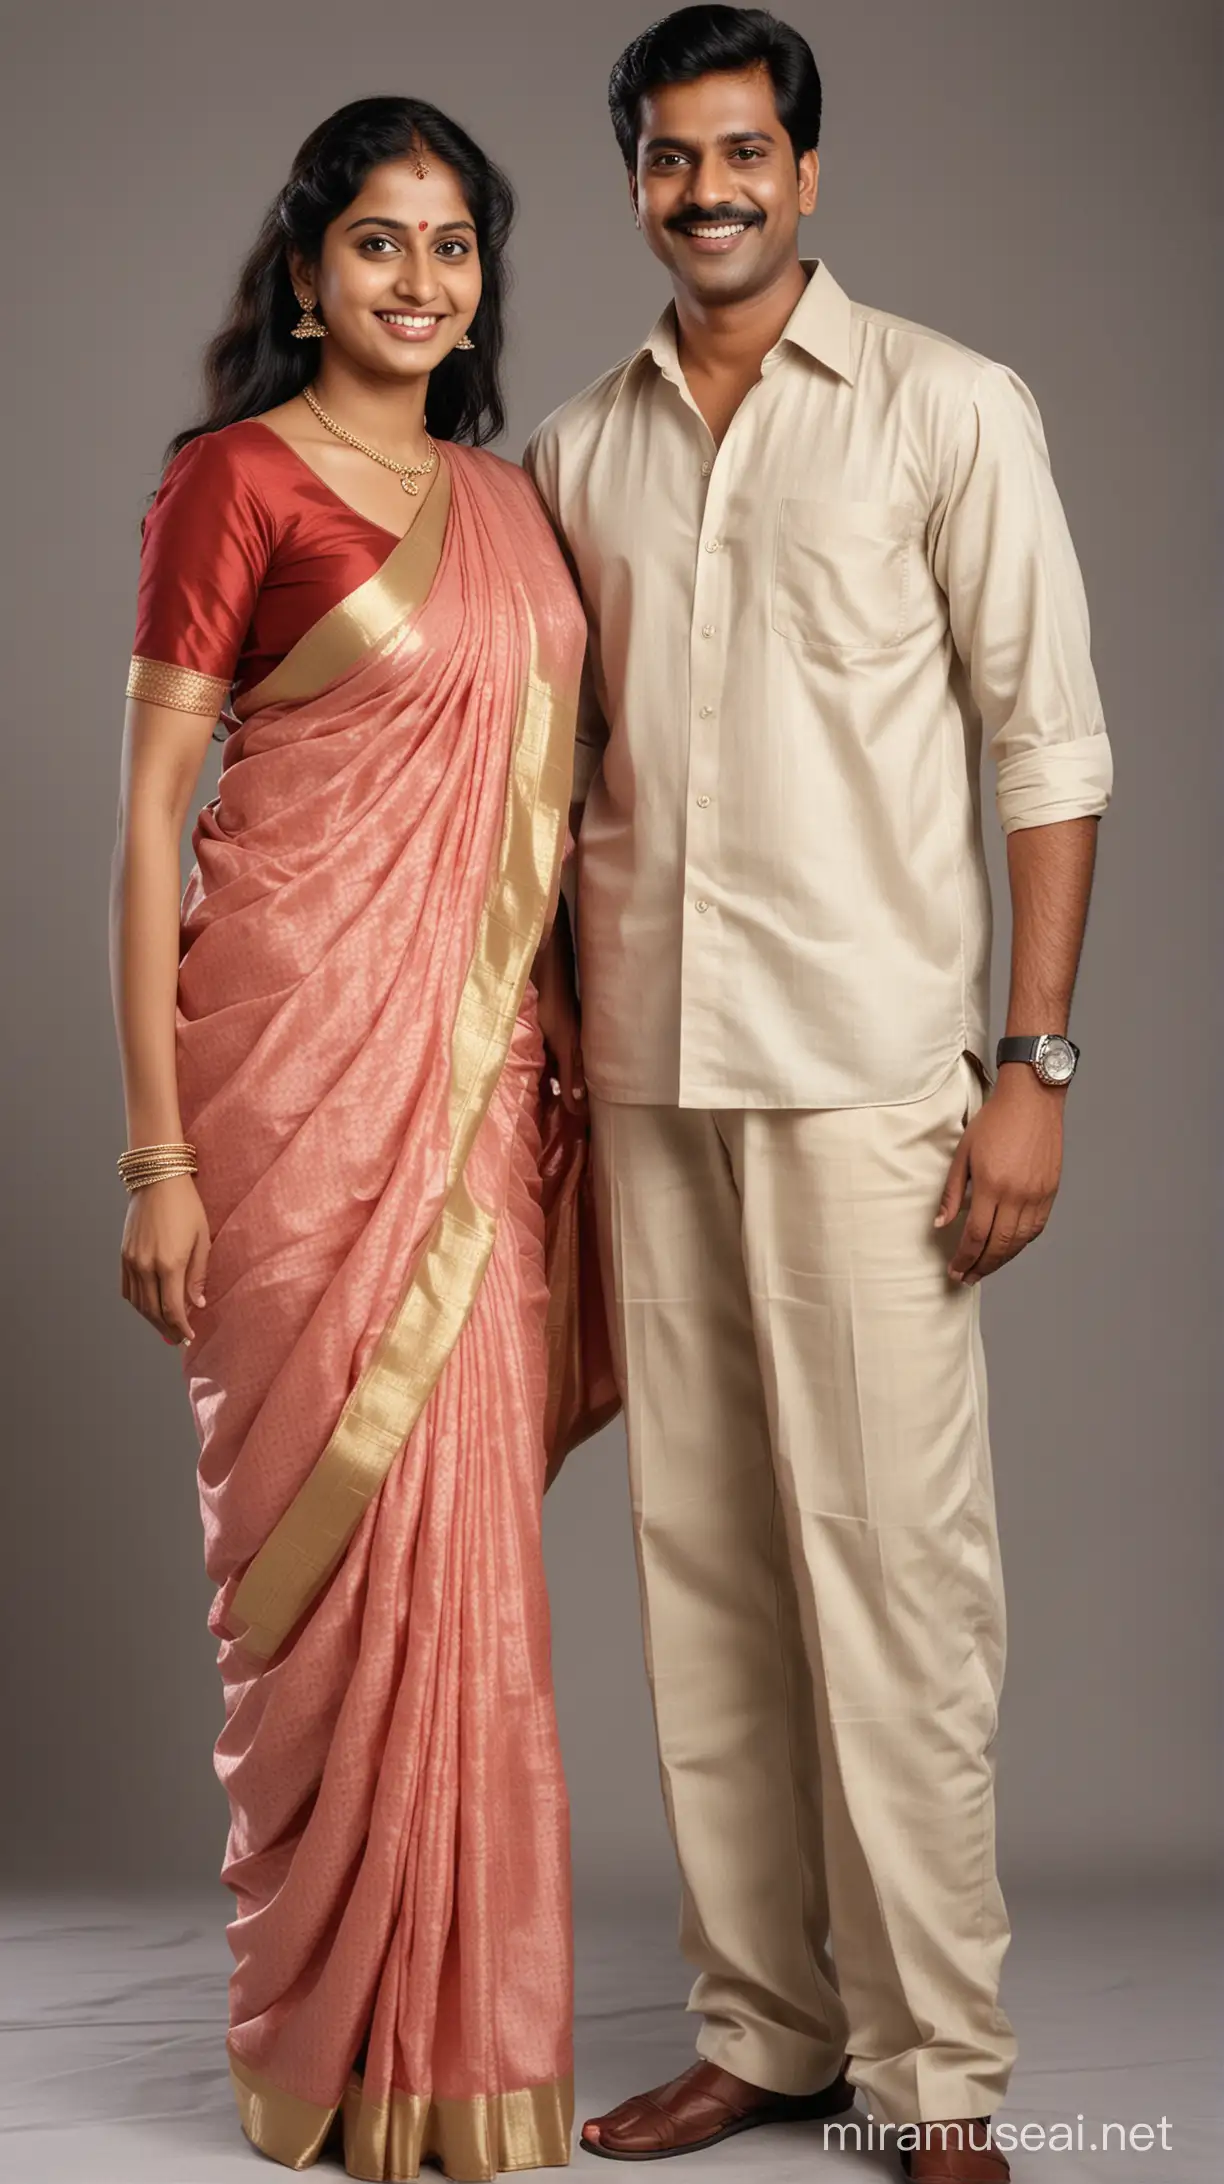 full length picture of a South Indian couple in the early 90s. Man wearing half sleeve shirt and pants. Woman wearing a simple saree. Both are smiling and posing for a picture